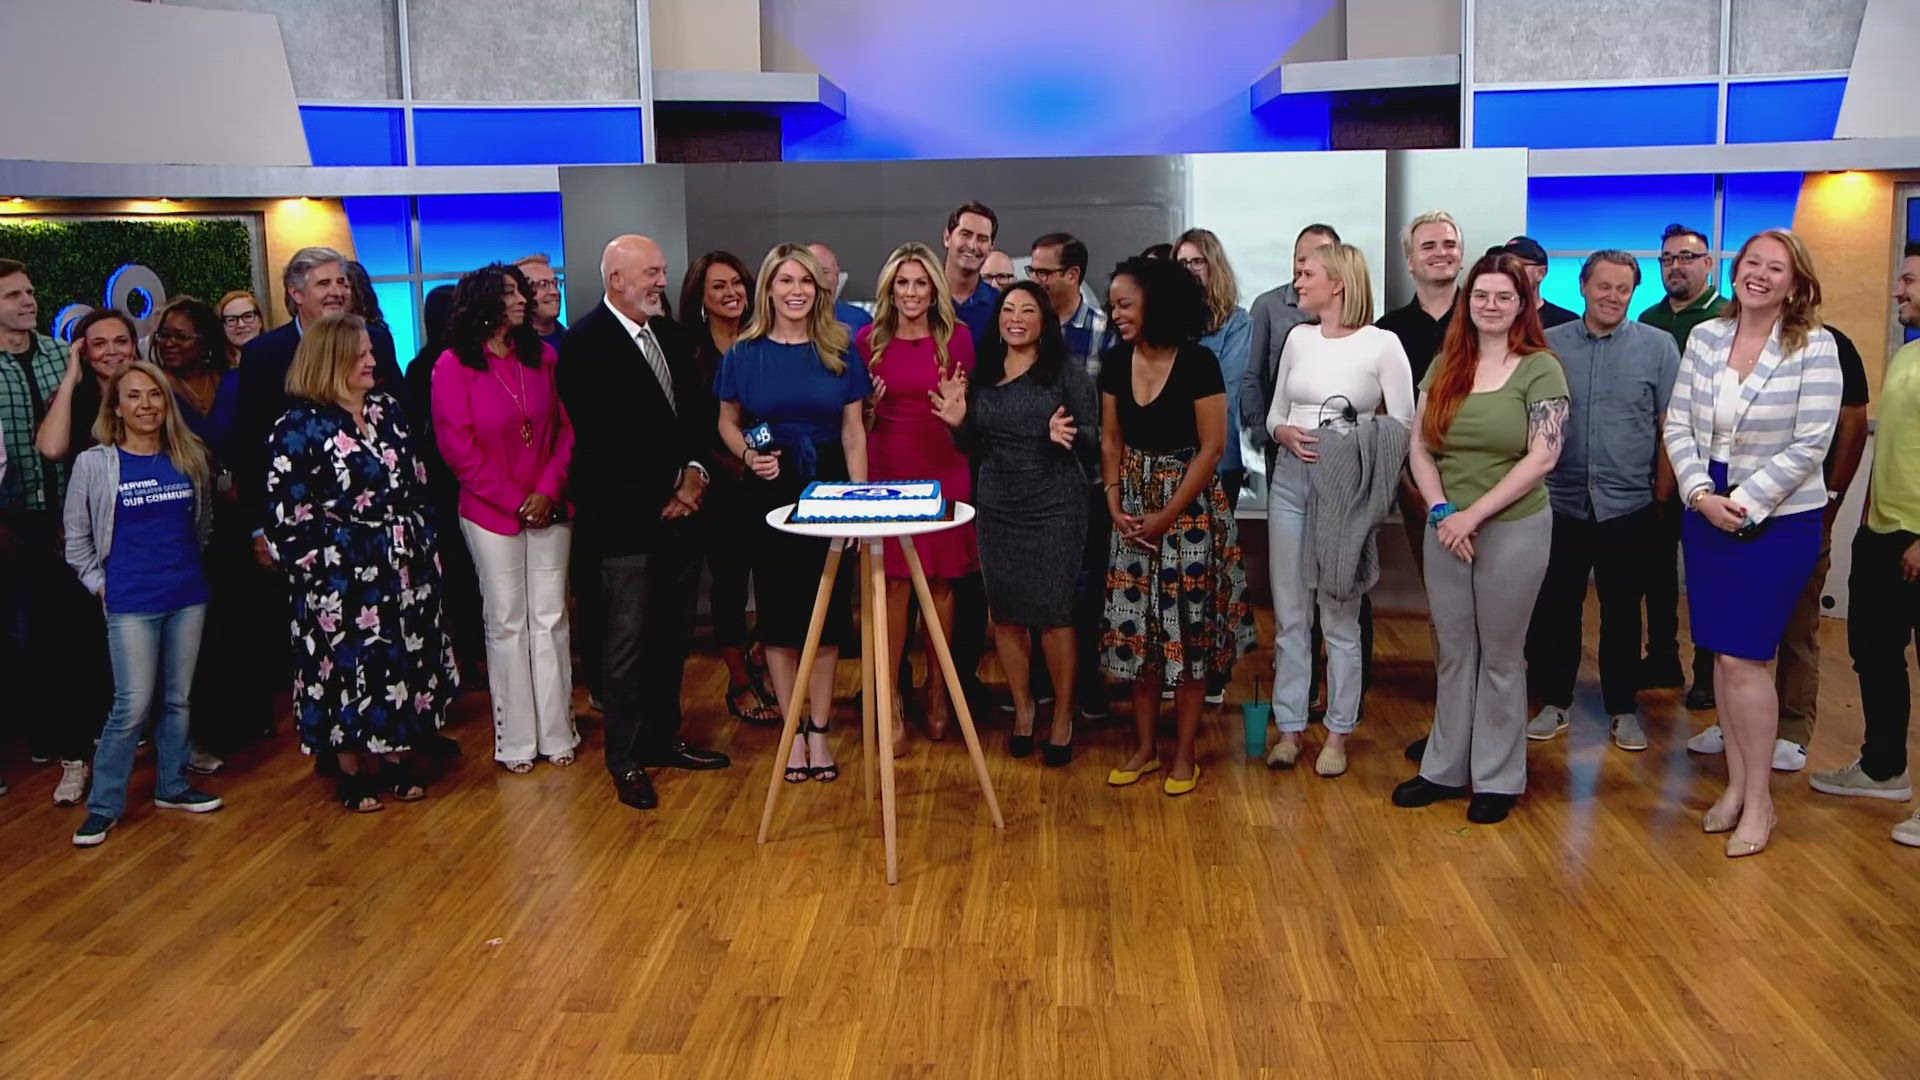 The team at CBS 8 took a moment to celebrate 75 years serving San Diego.